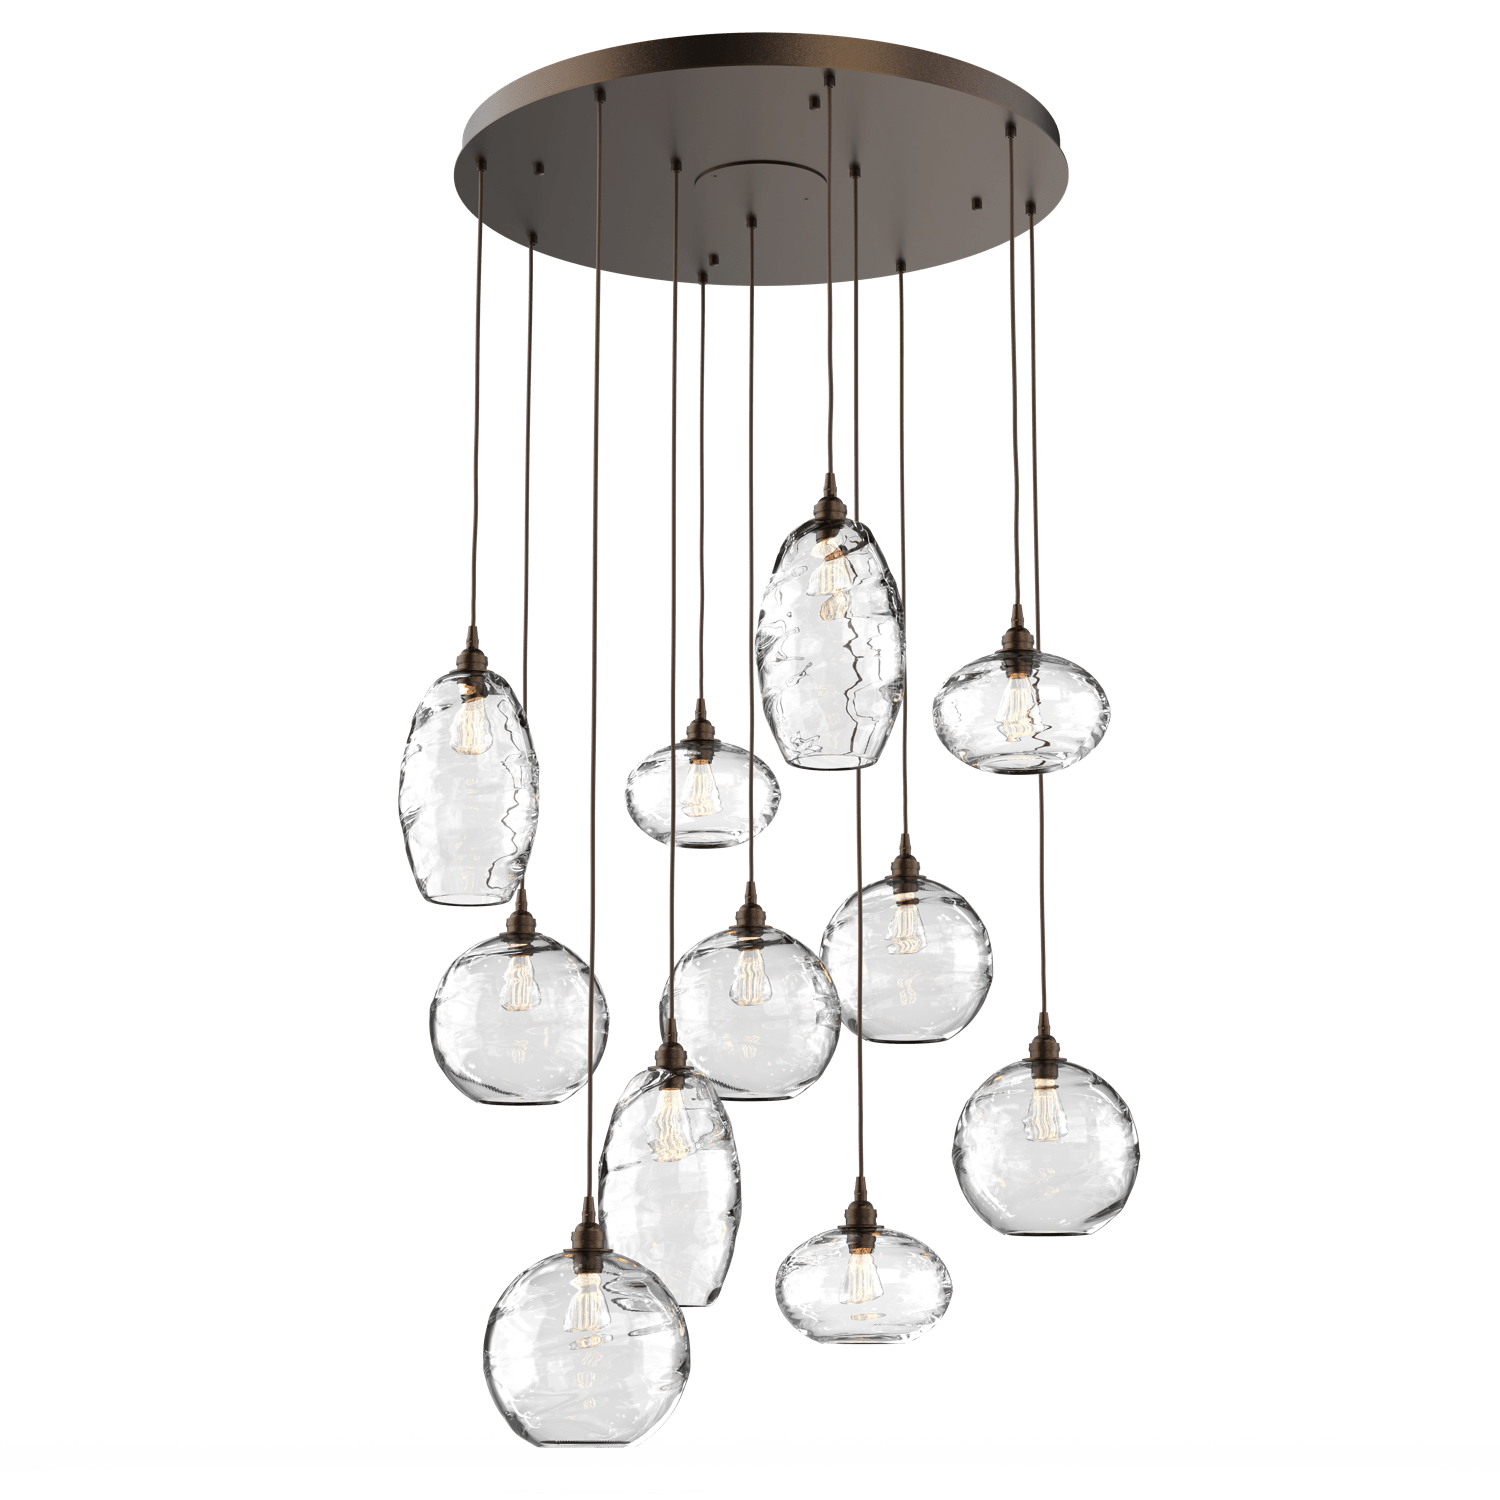 CHB0048-11-FB-OC-Hammerton-Studio-Optic-Blown-Glass-Misto-11-light-round-pendant-chandelier-with-flat-bronze-finish-and-optic-clear-blown-glass-shades-and-incandescent-lamping